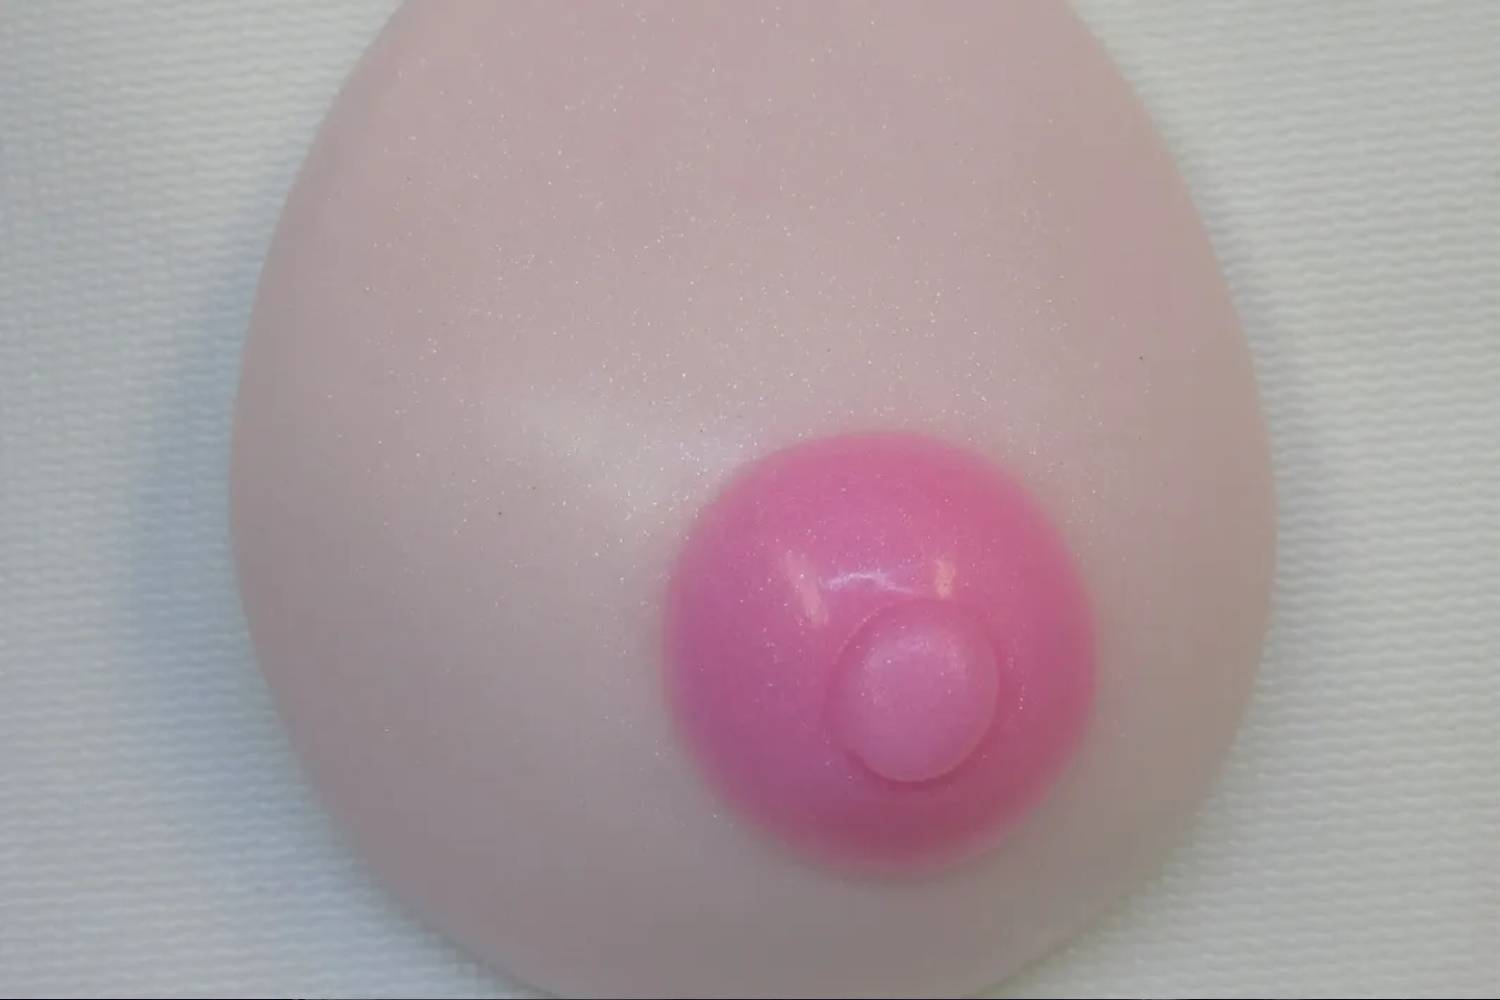 A pink breast implant is shown on the side of a wall.